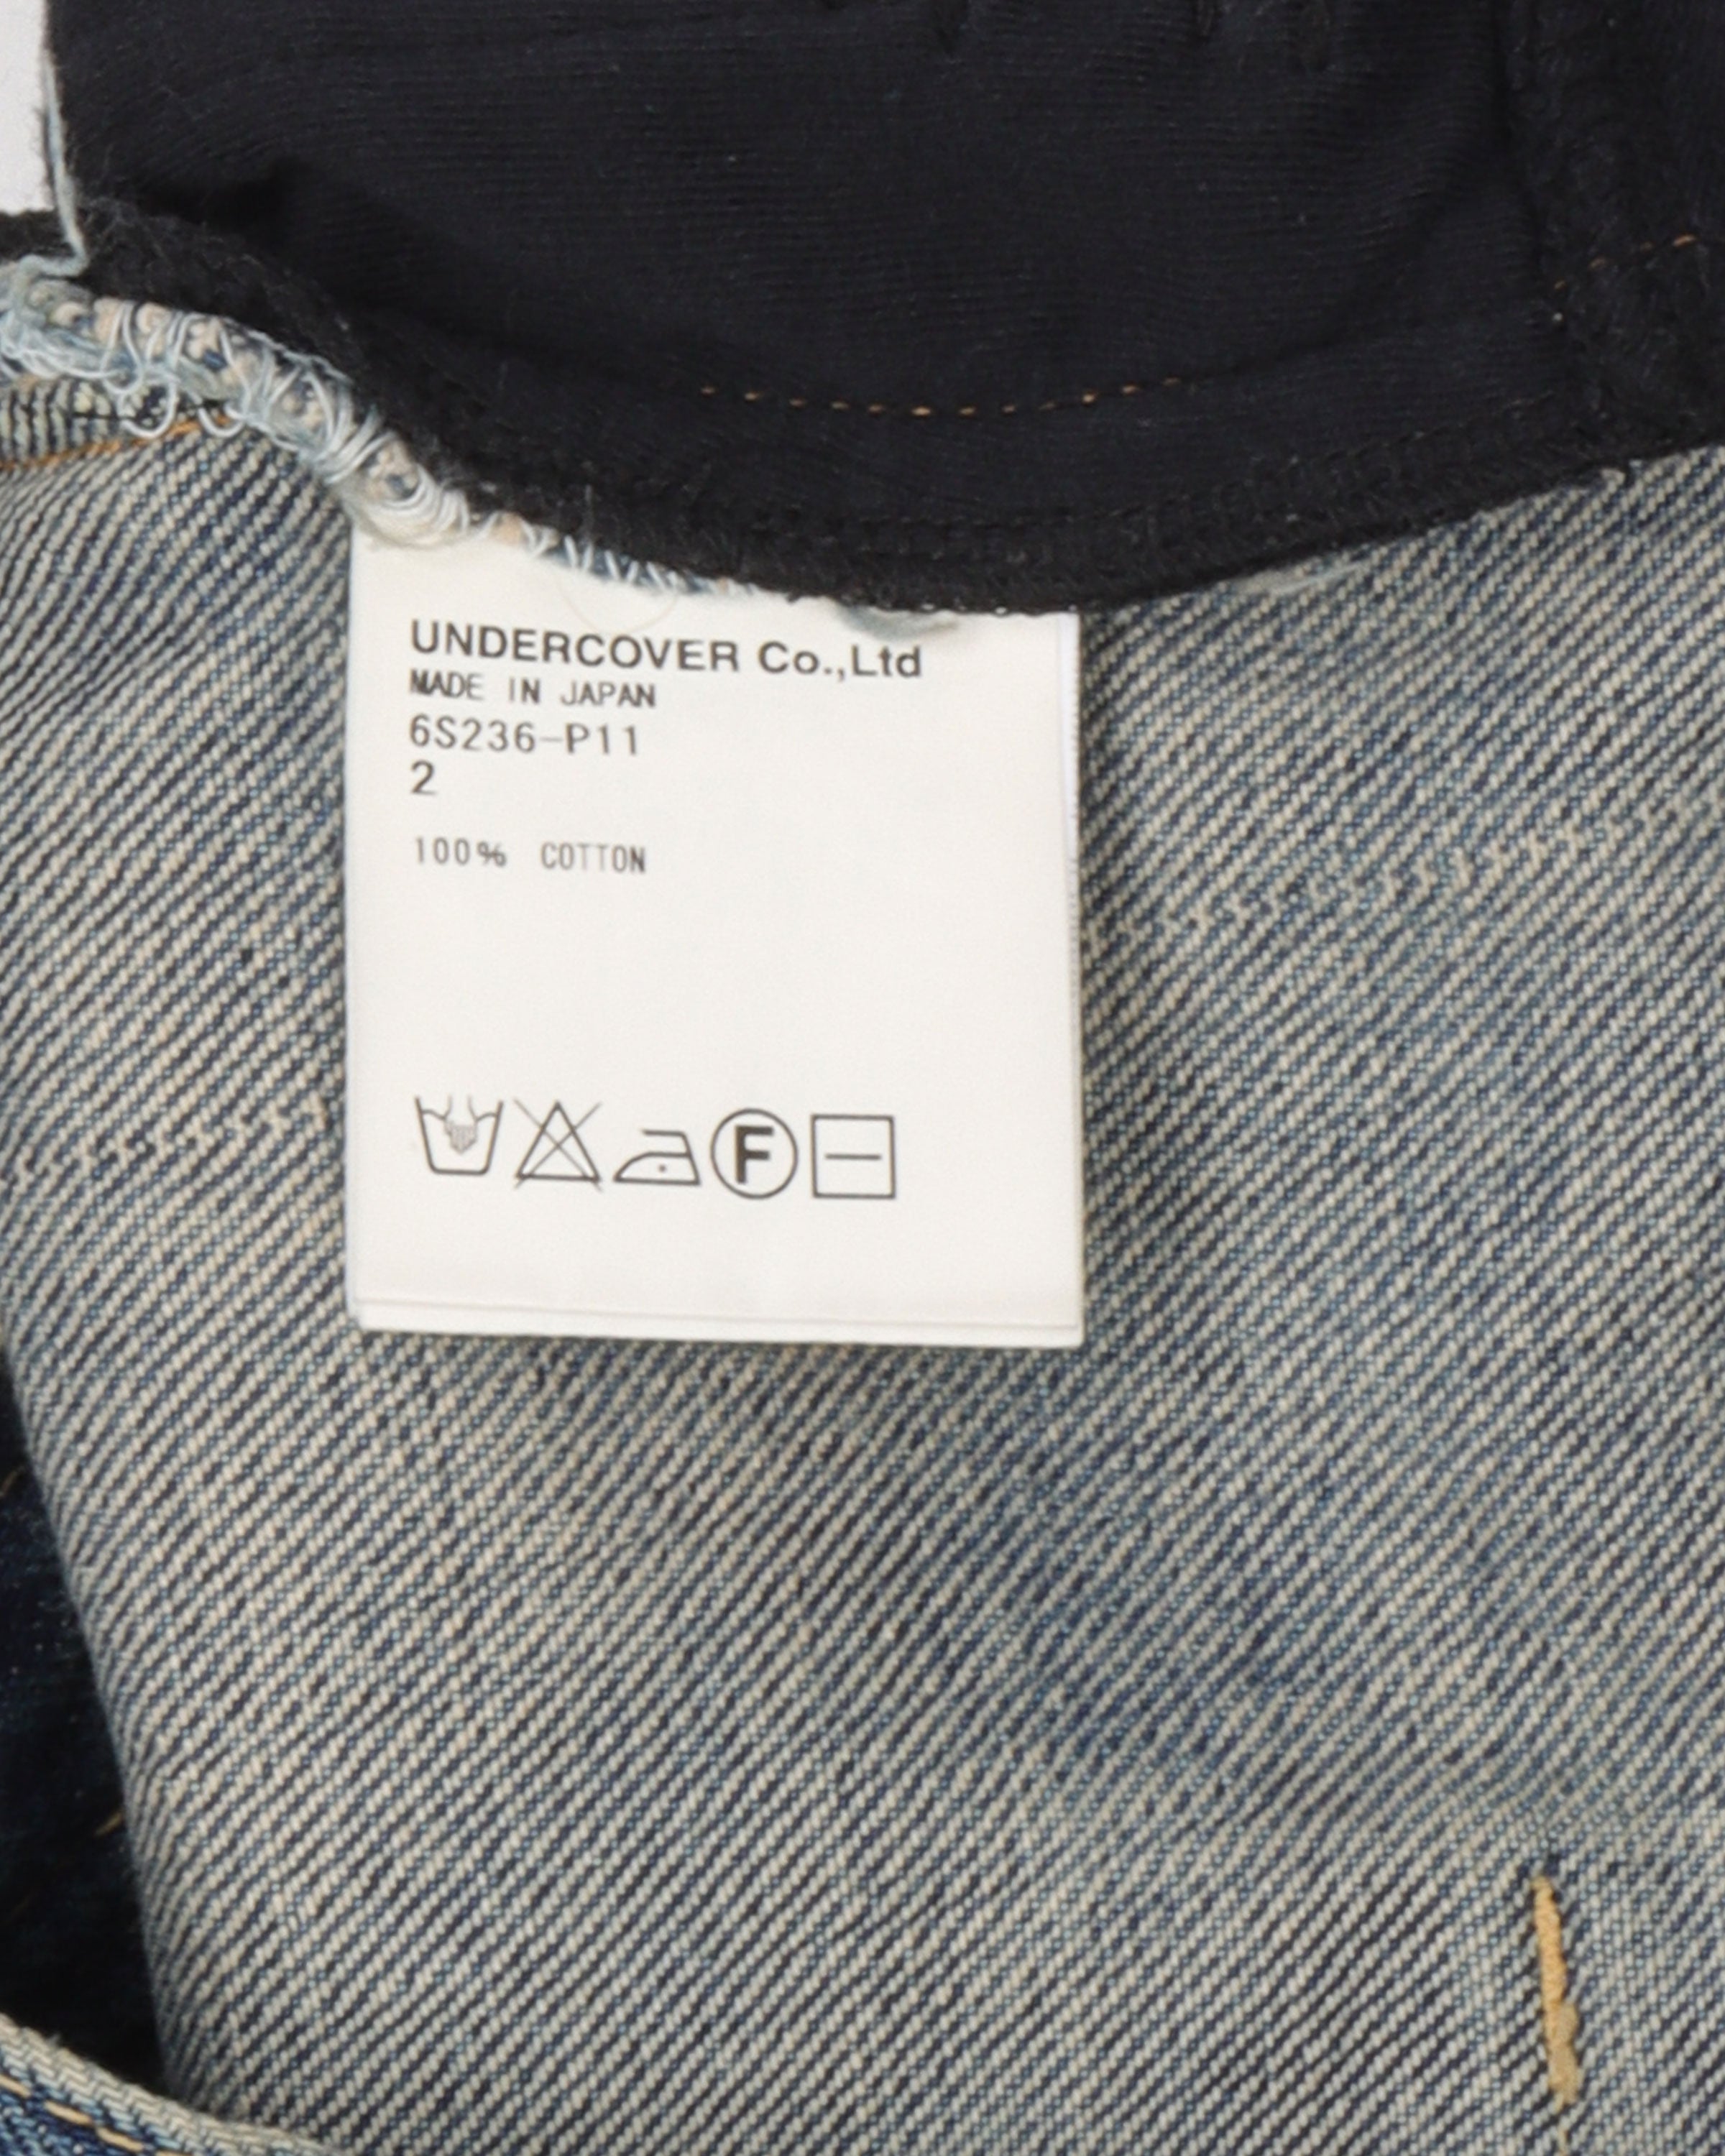 SS06 "T" Tale of Zamiang Hybrid Jeans